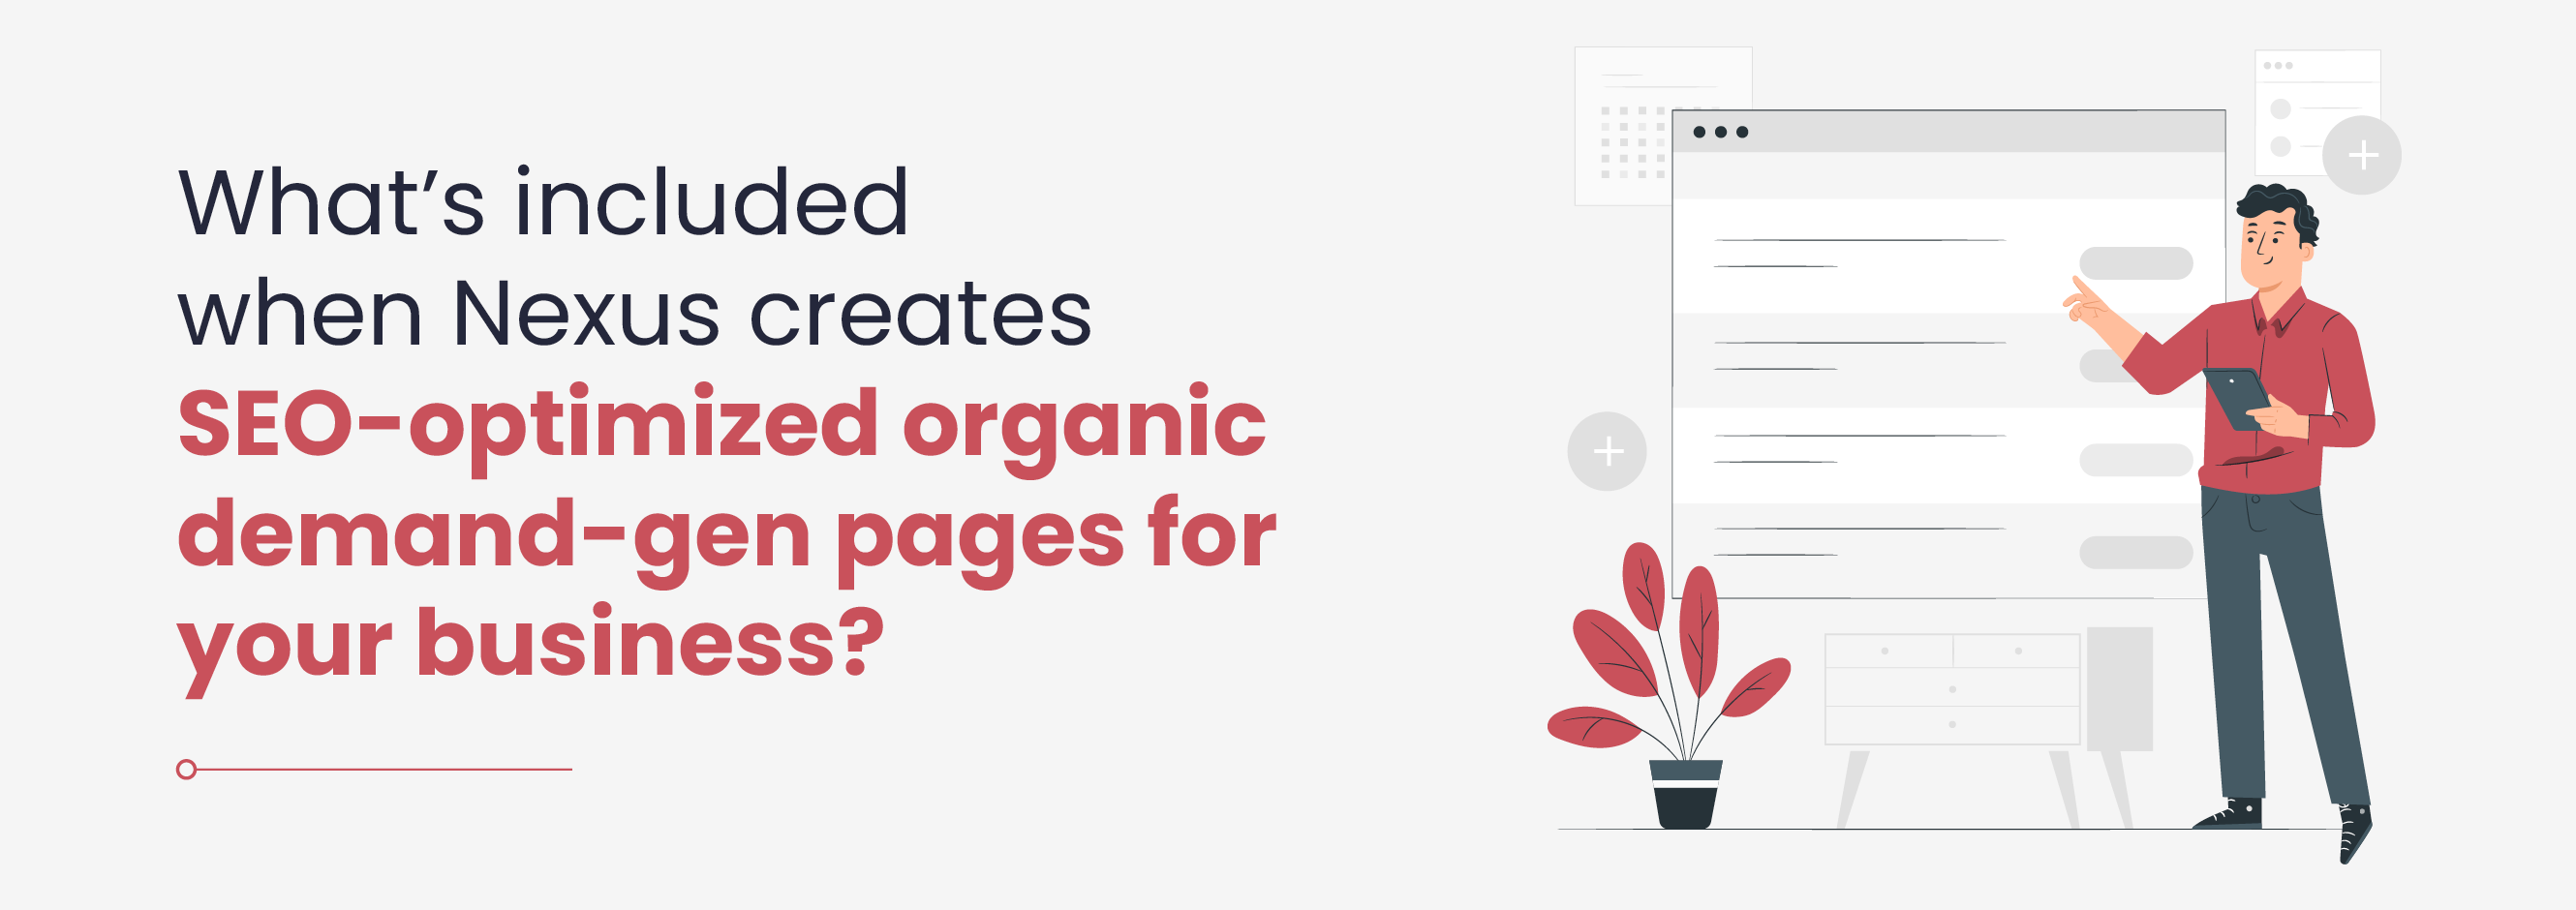 What's included when Nexus Marketing creates SEO-optimized organic demand-gen content for your business?